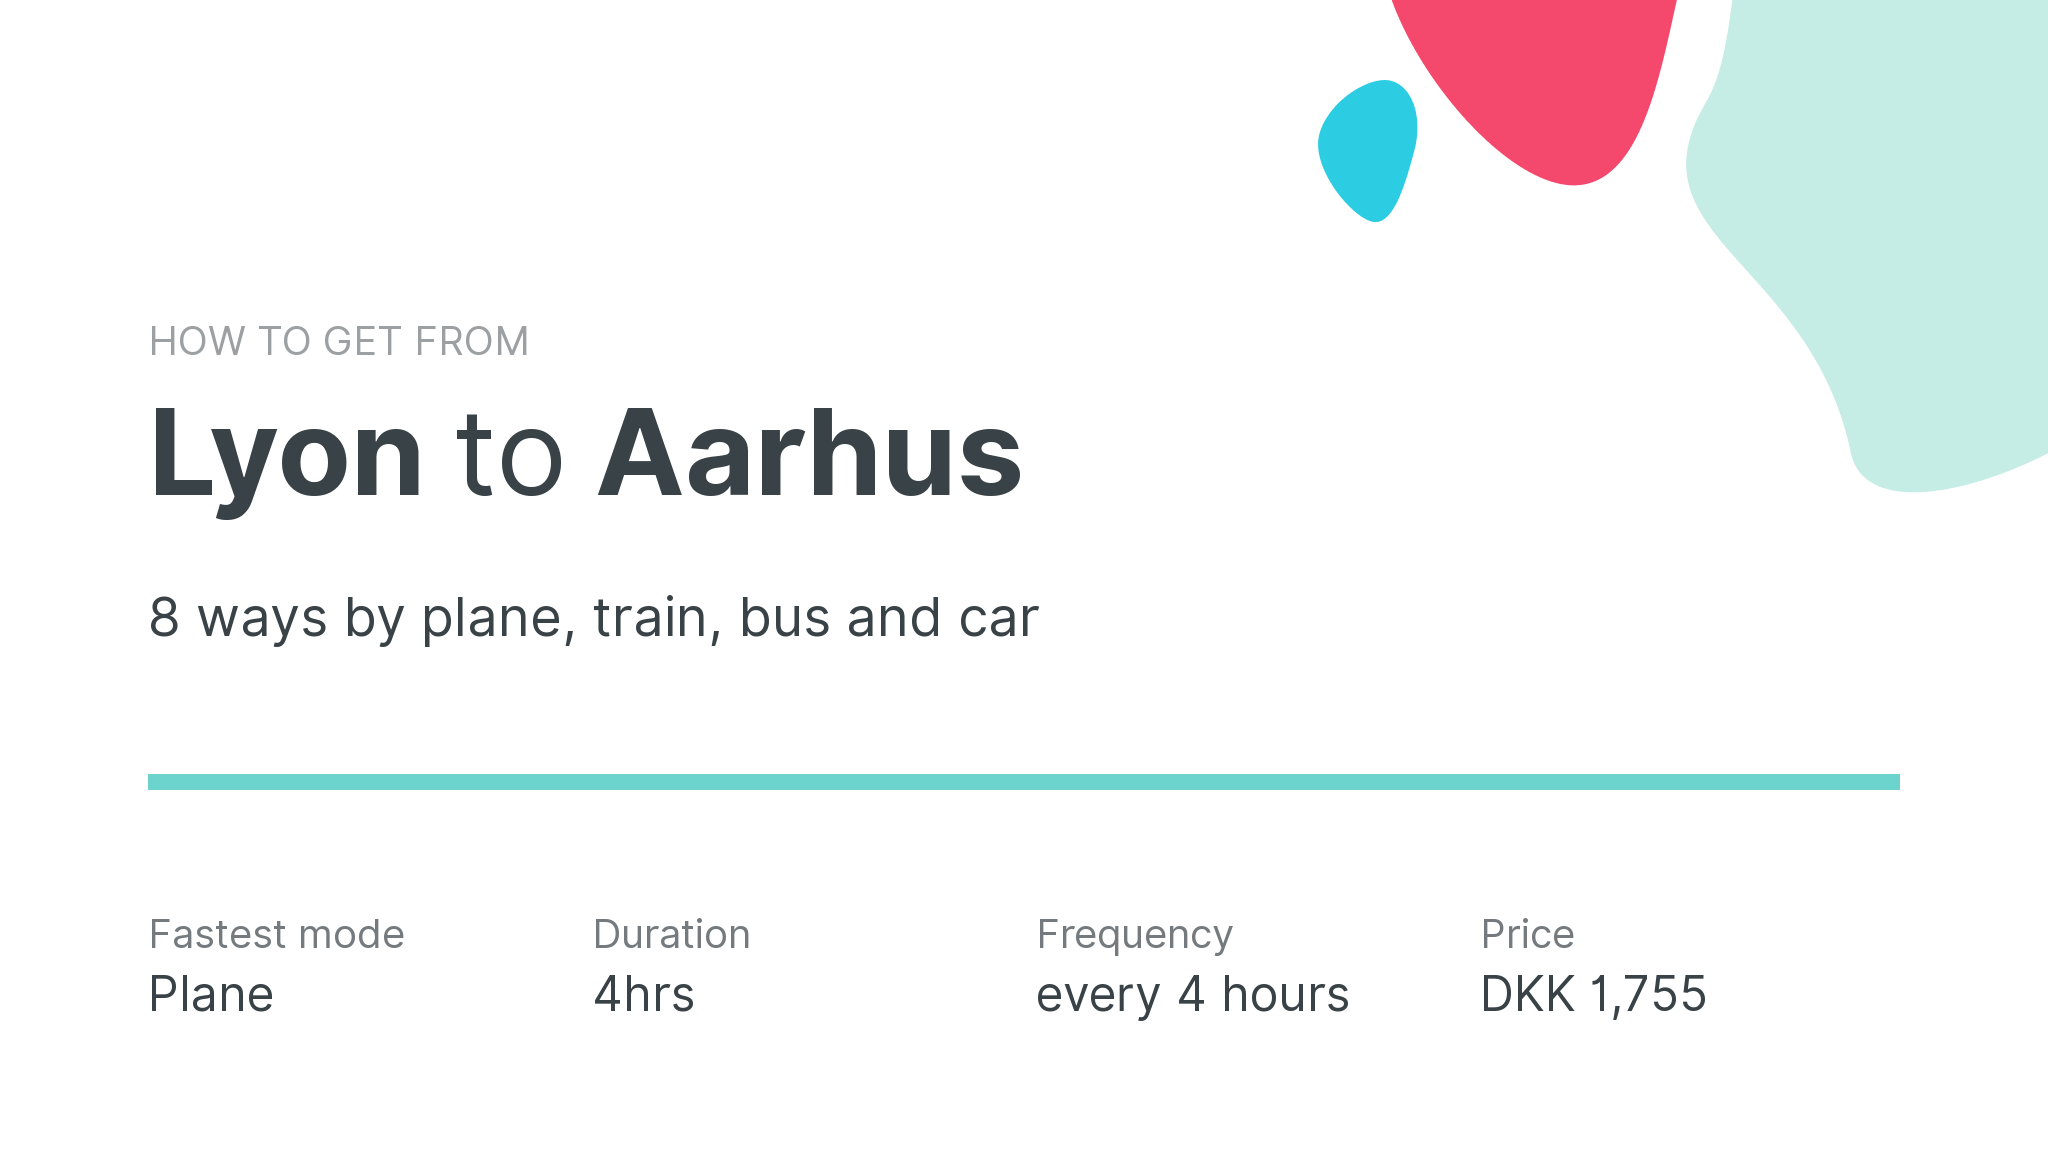 How do I get from Lyon to Aarhus